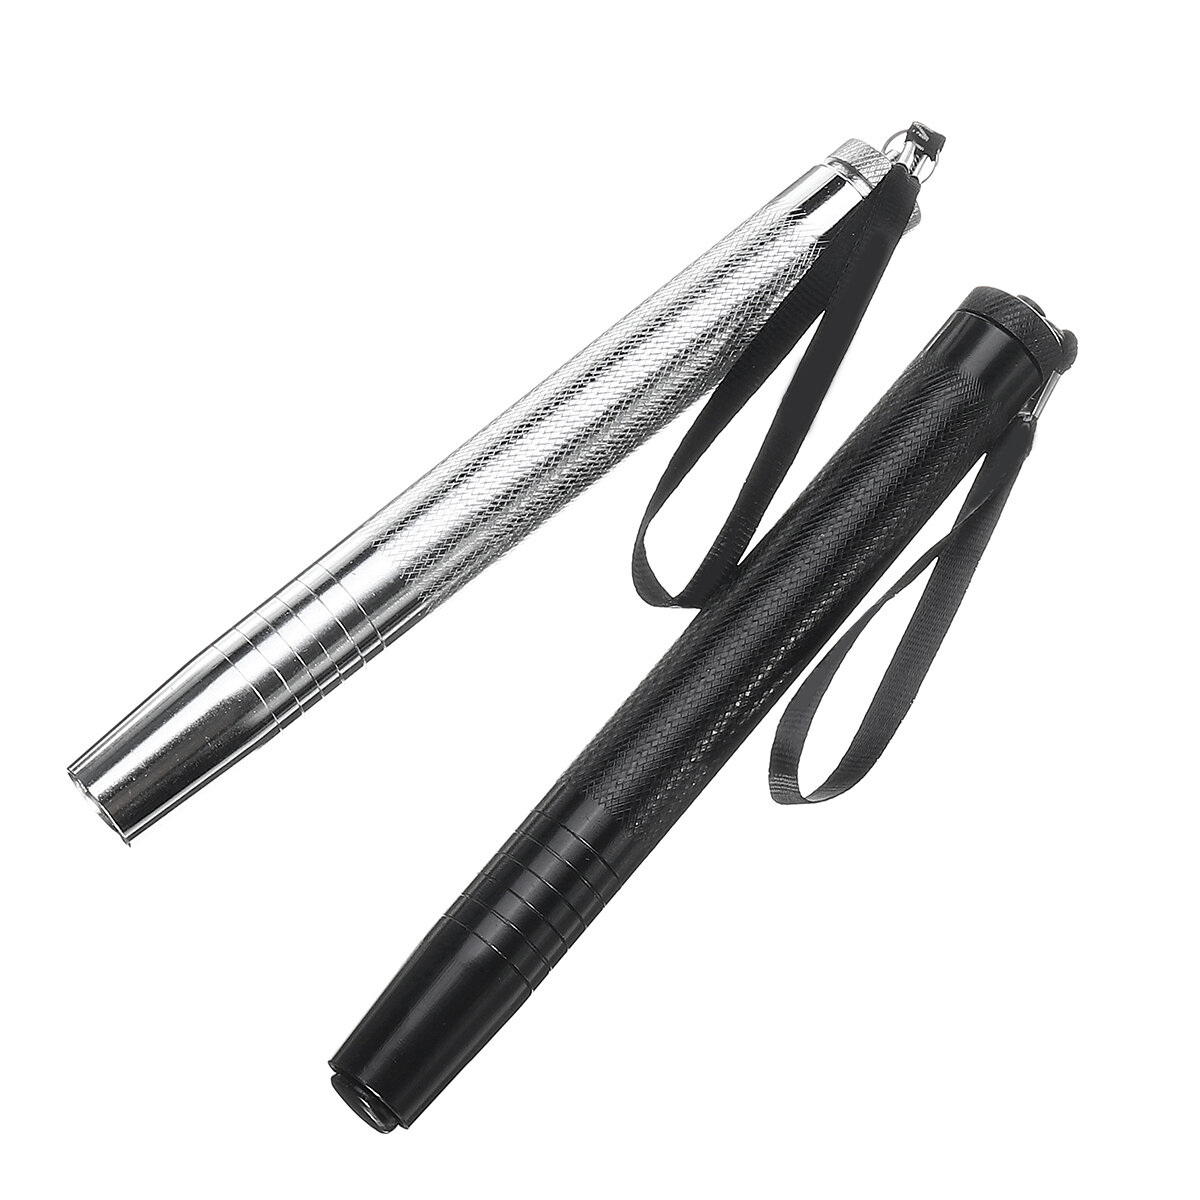 Telescopic Steel Stick Rod Safe Walking Security Emergency Portable 3 Sections